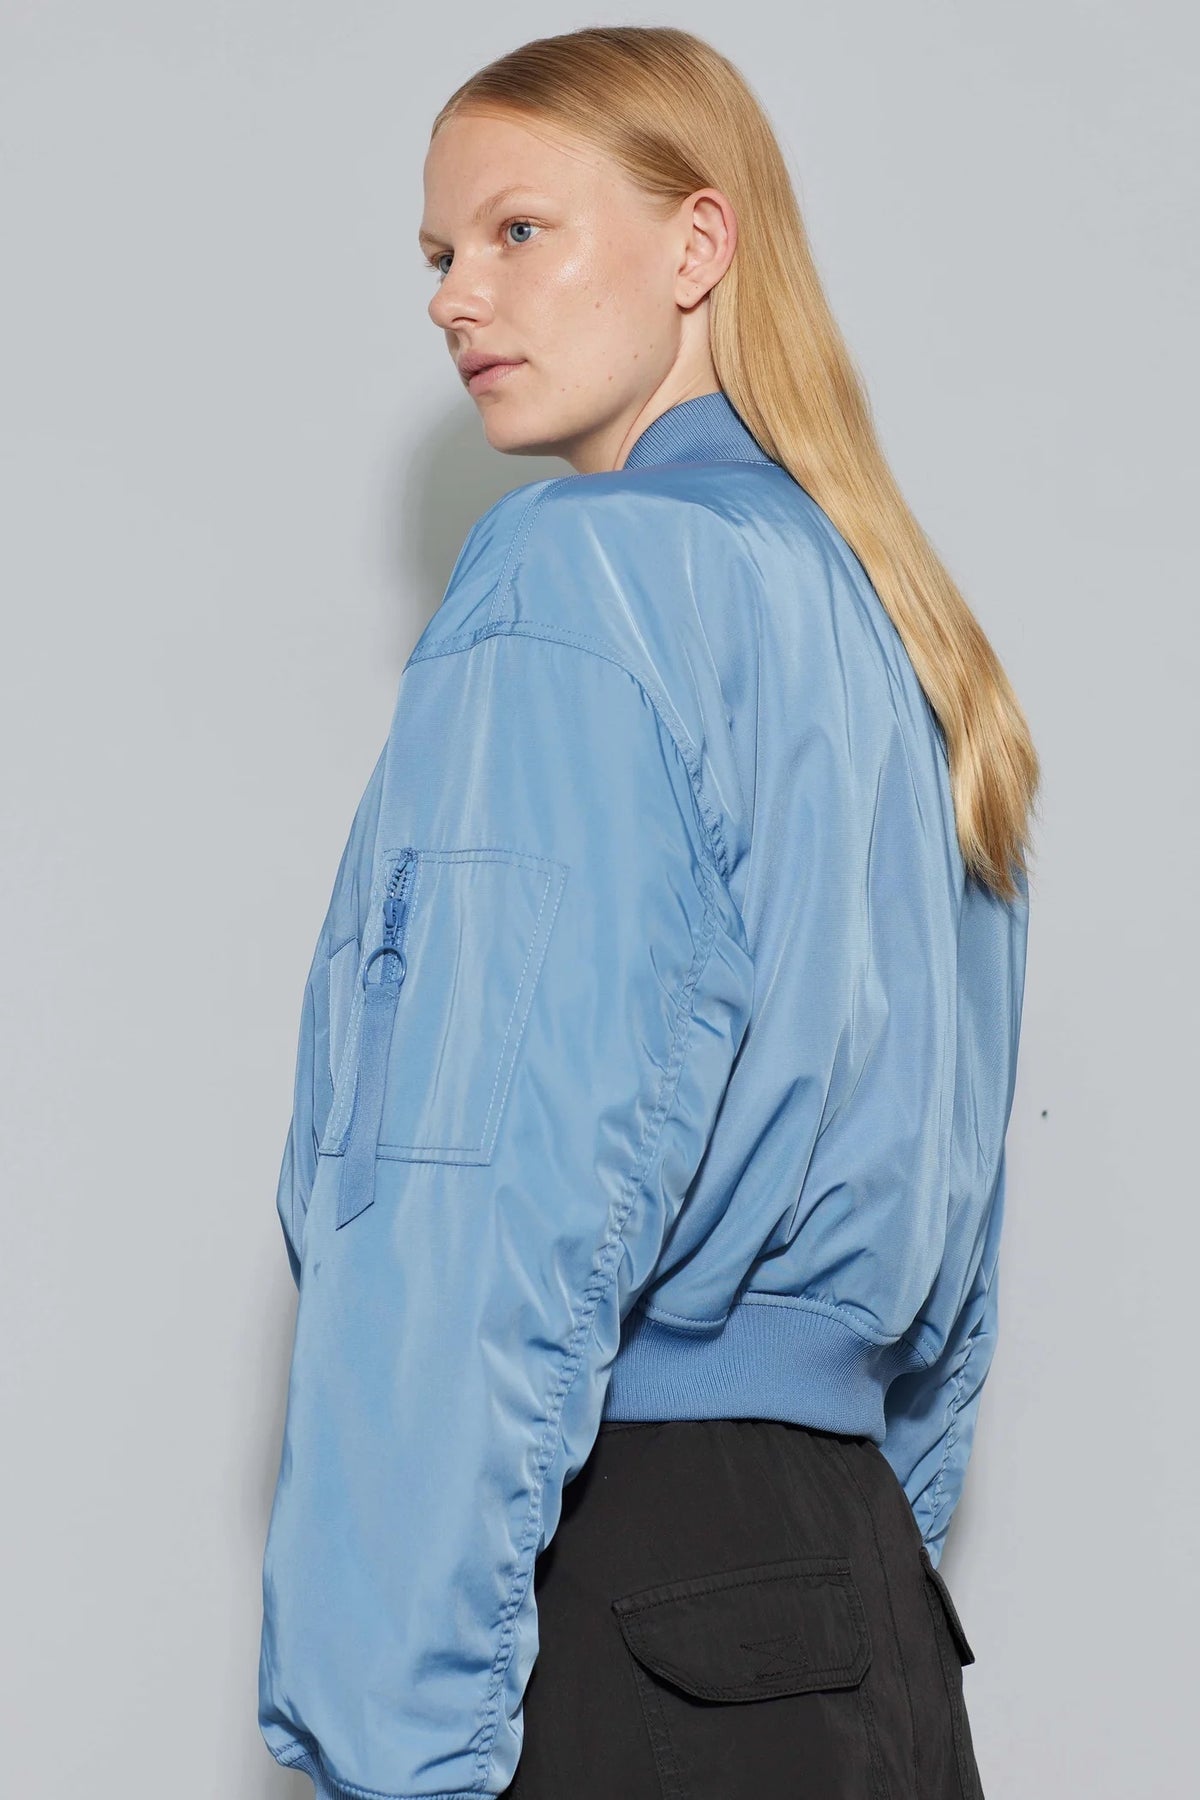 Oval Square Flight Cropped Bomber // Coronet